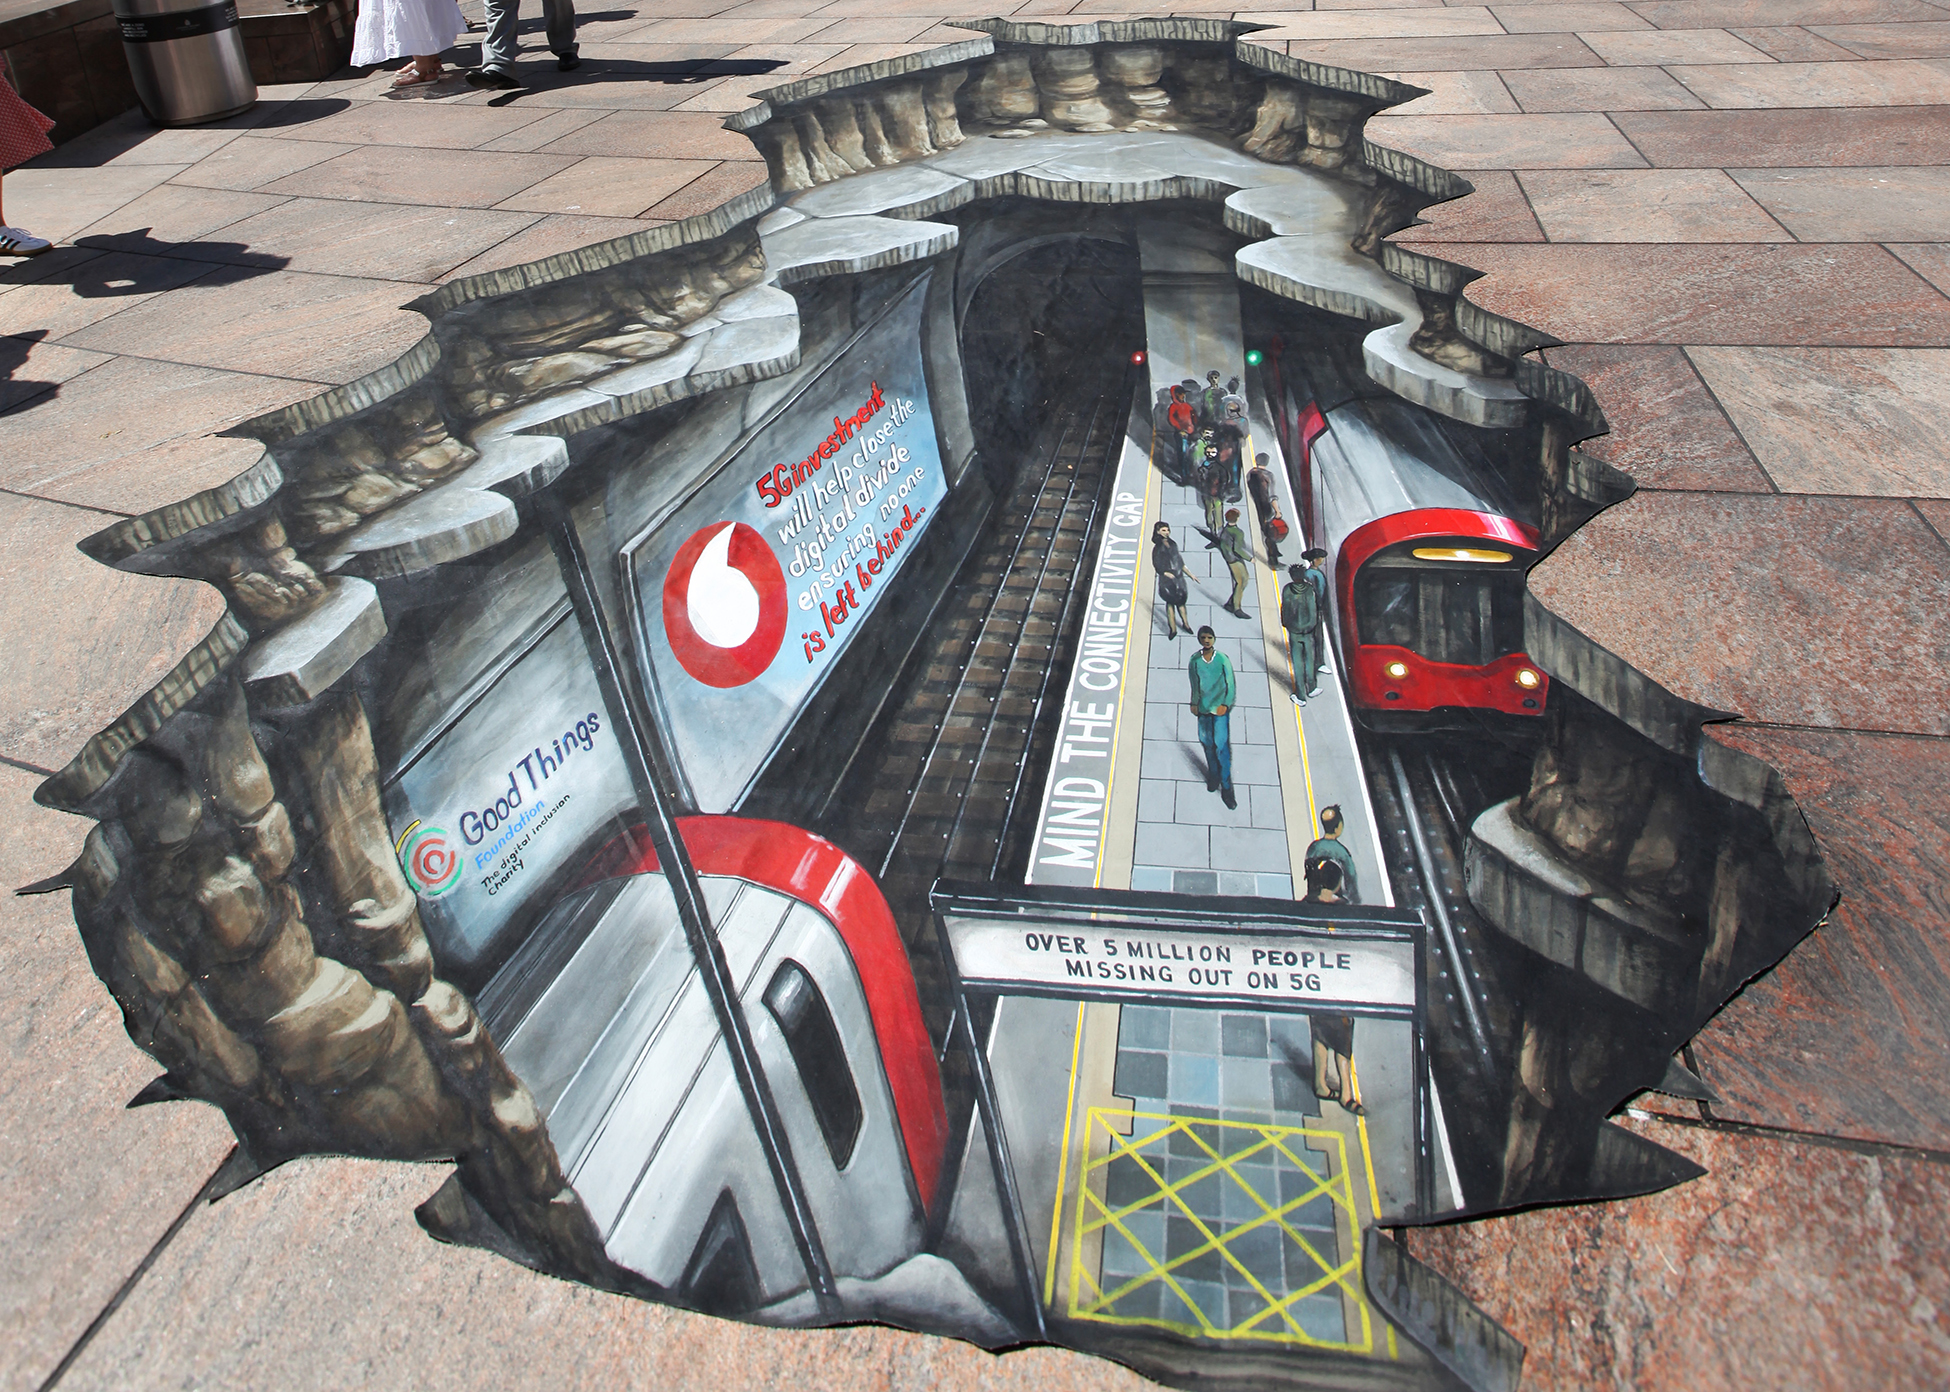 Painting on the ground in London centre of the underground, with billboards of Good Things and Vodafone logos, stating '5G will help close the digital divide, ensuring no one is left behind...' with a sign on the platform reading 'over 5 million people missing out on 5G'.